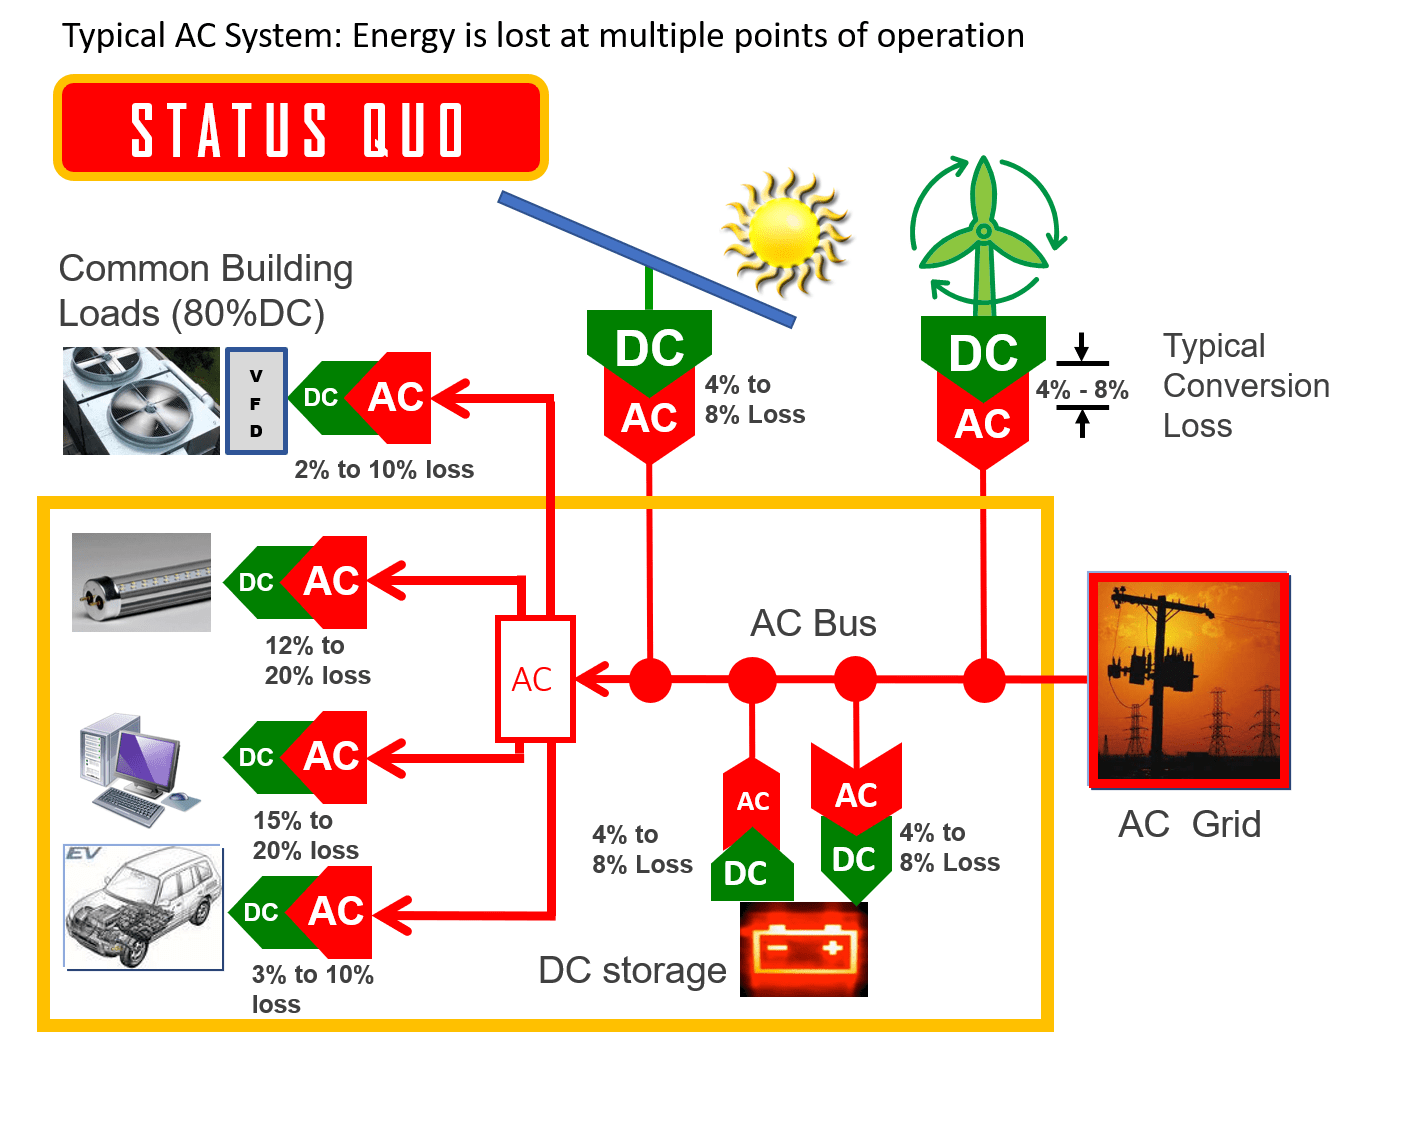 AC: Energy is lost at multiple points of operation